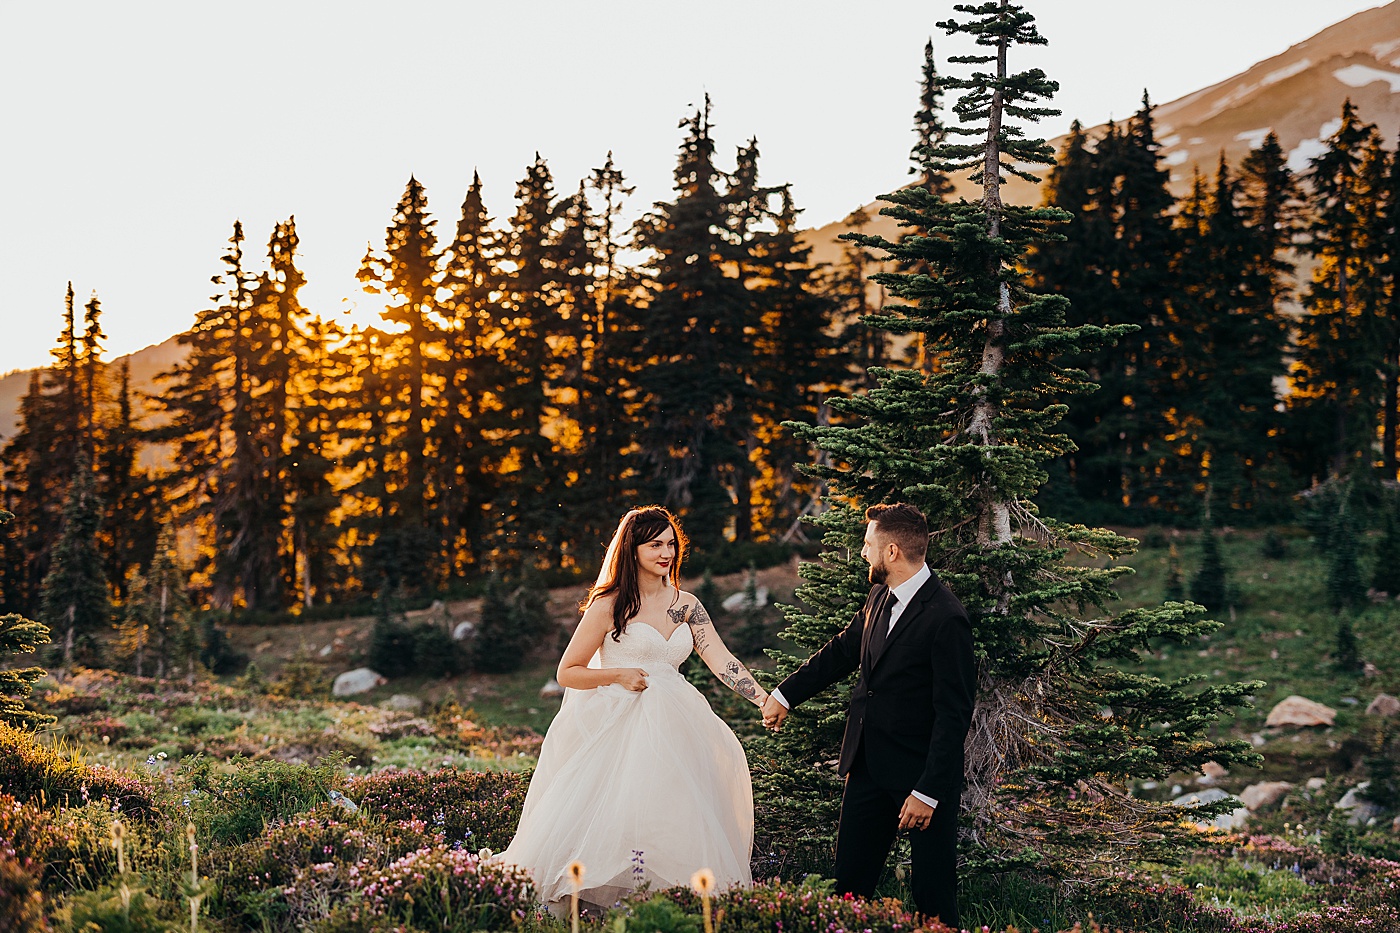 Bride and groom walking along the Skyline Trail at sunset | Photo by Megan Montalvo Photography